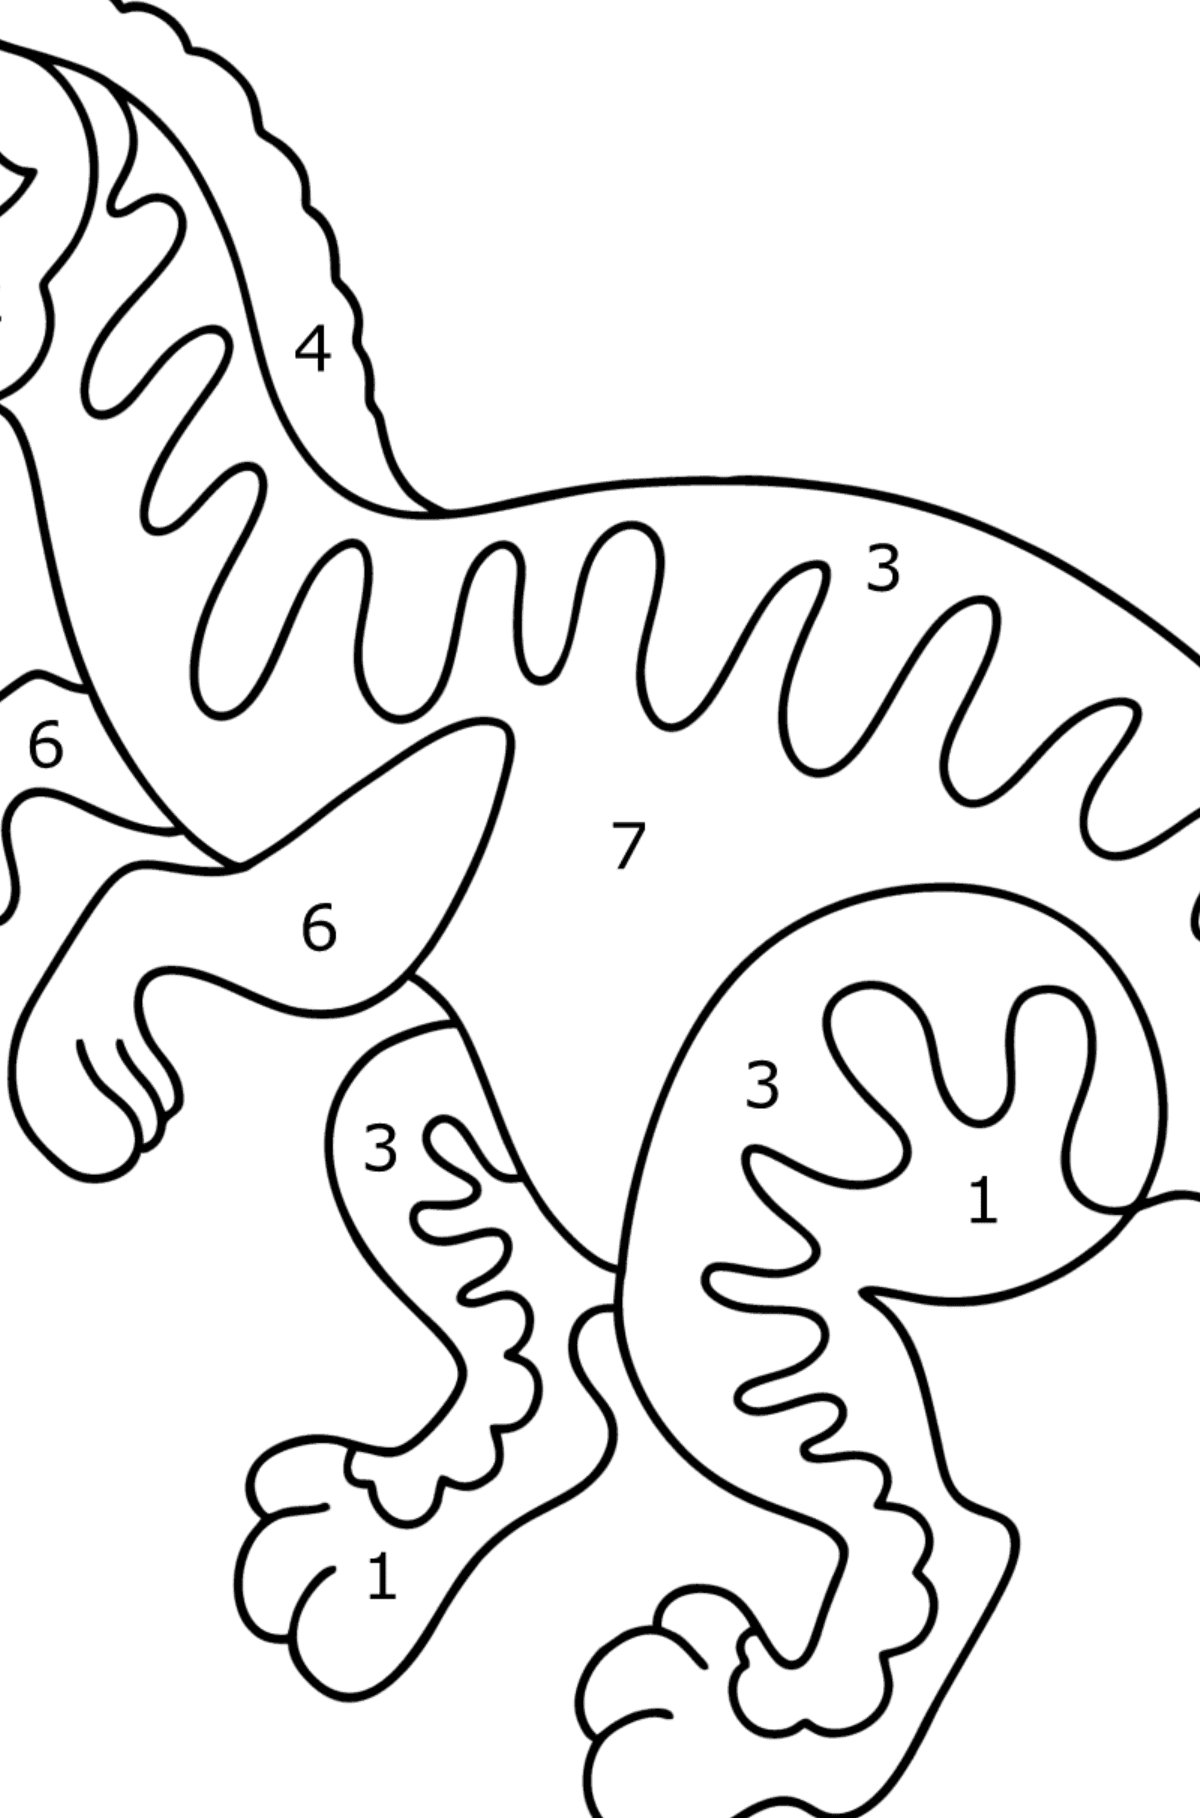 Velociraptor coloring page - Coloring by Numbers for Kids